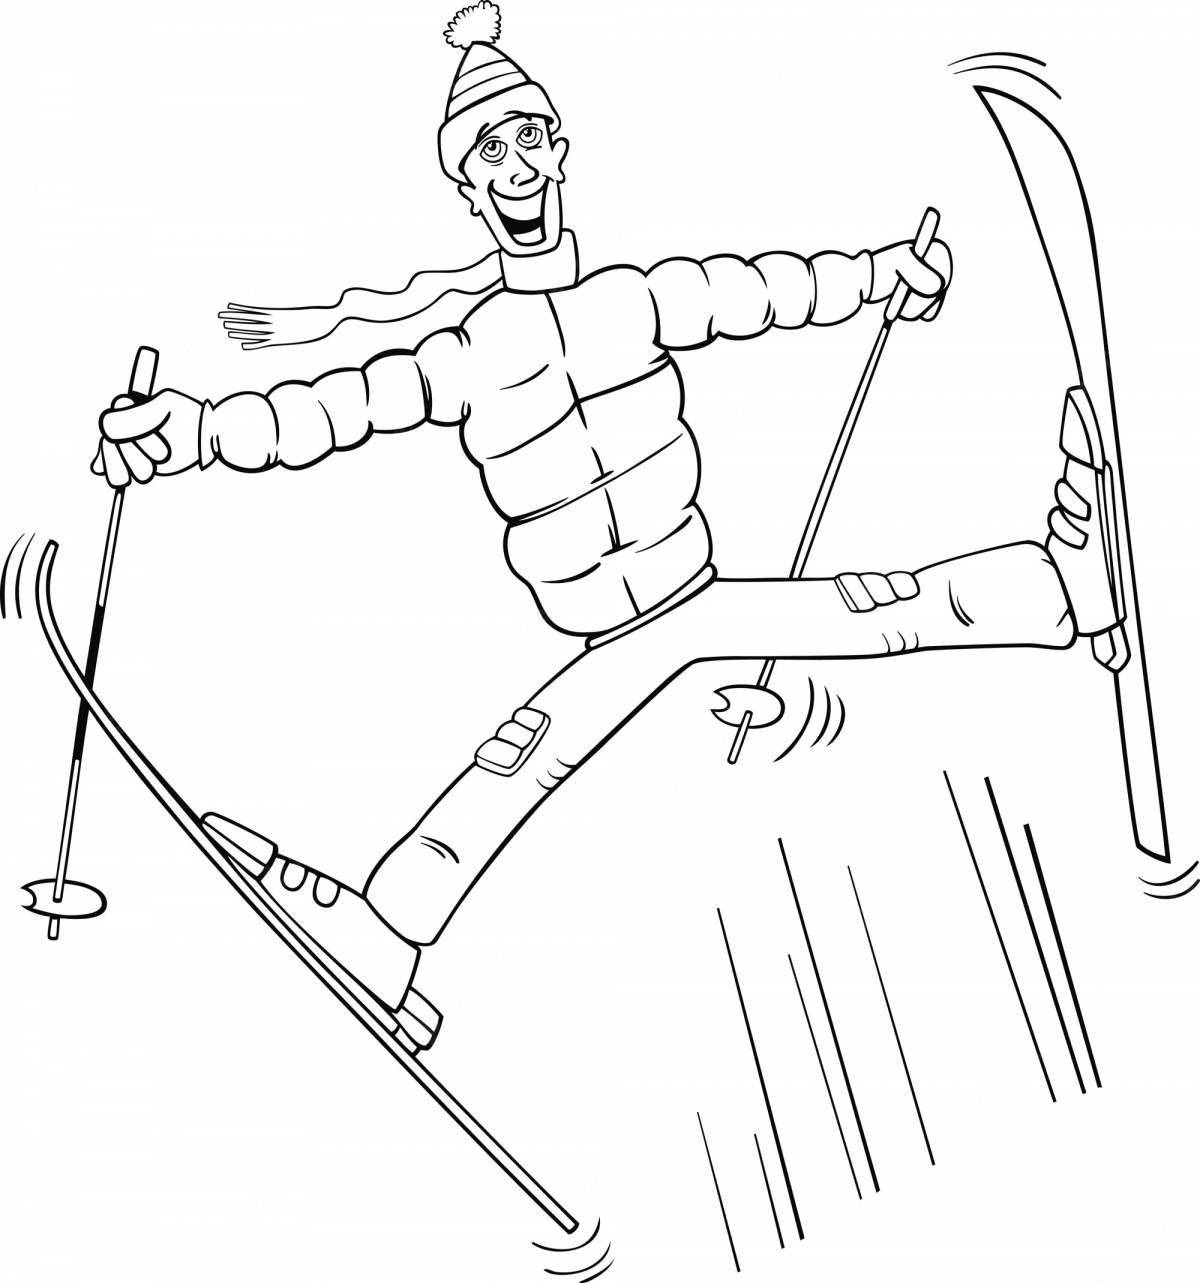 Coloring page dazzling skier